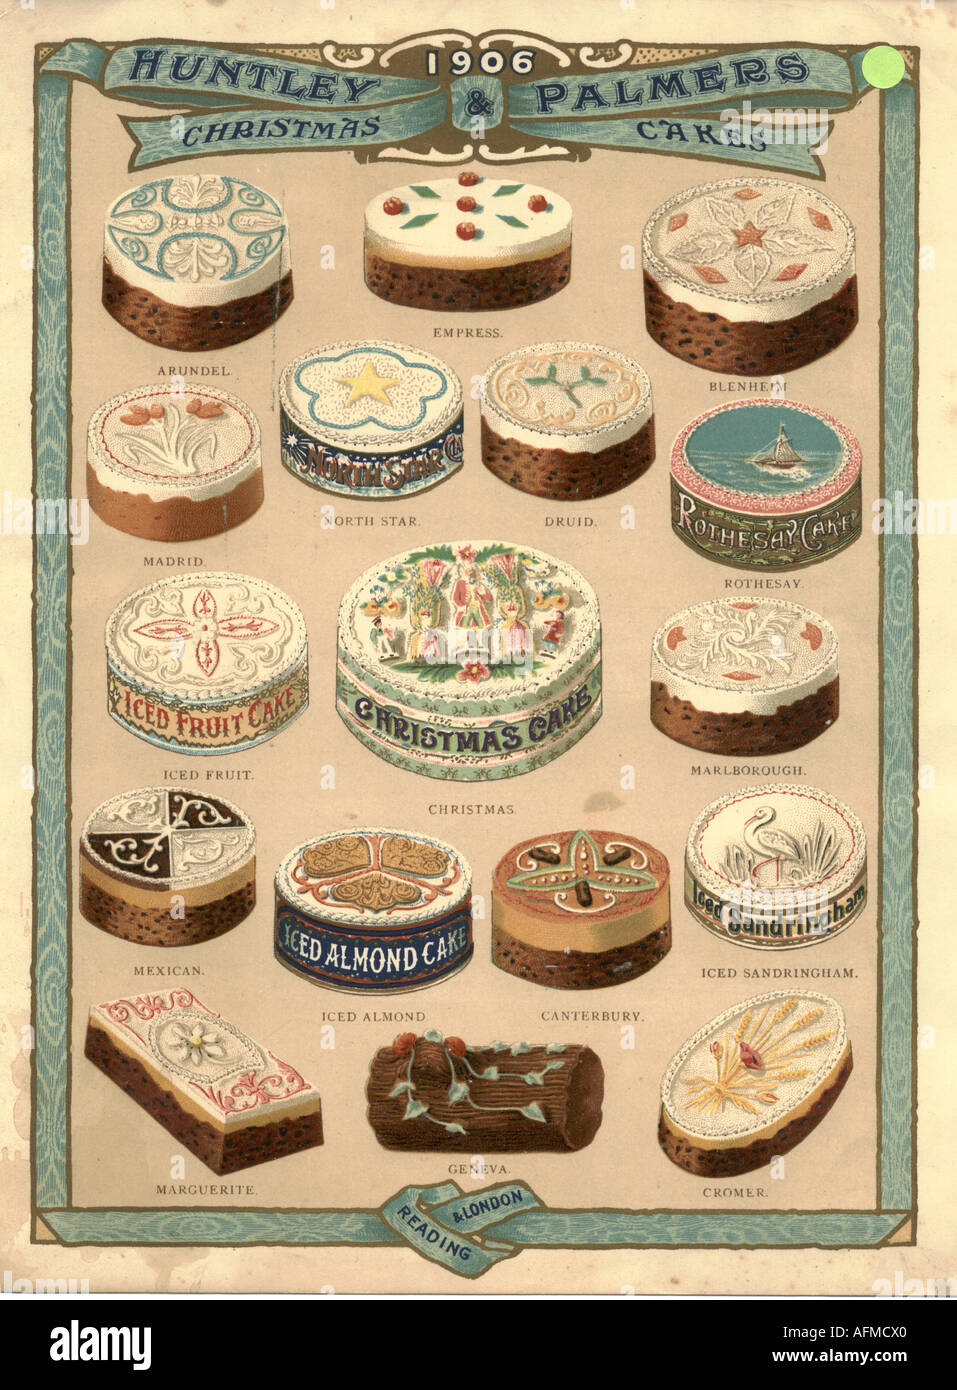 Christmas cakes from Huntley & Palmers 1906 Stock Photo